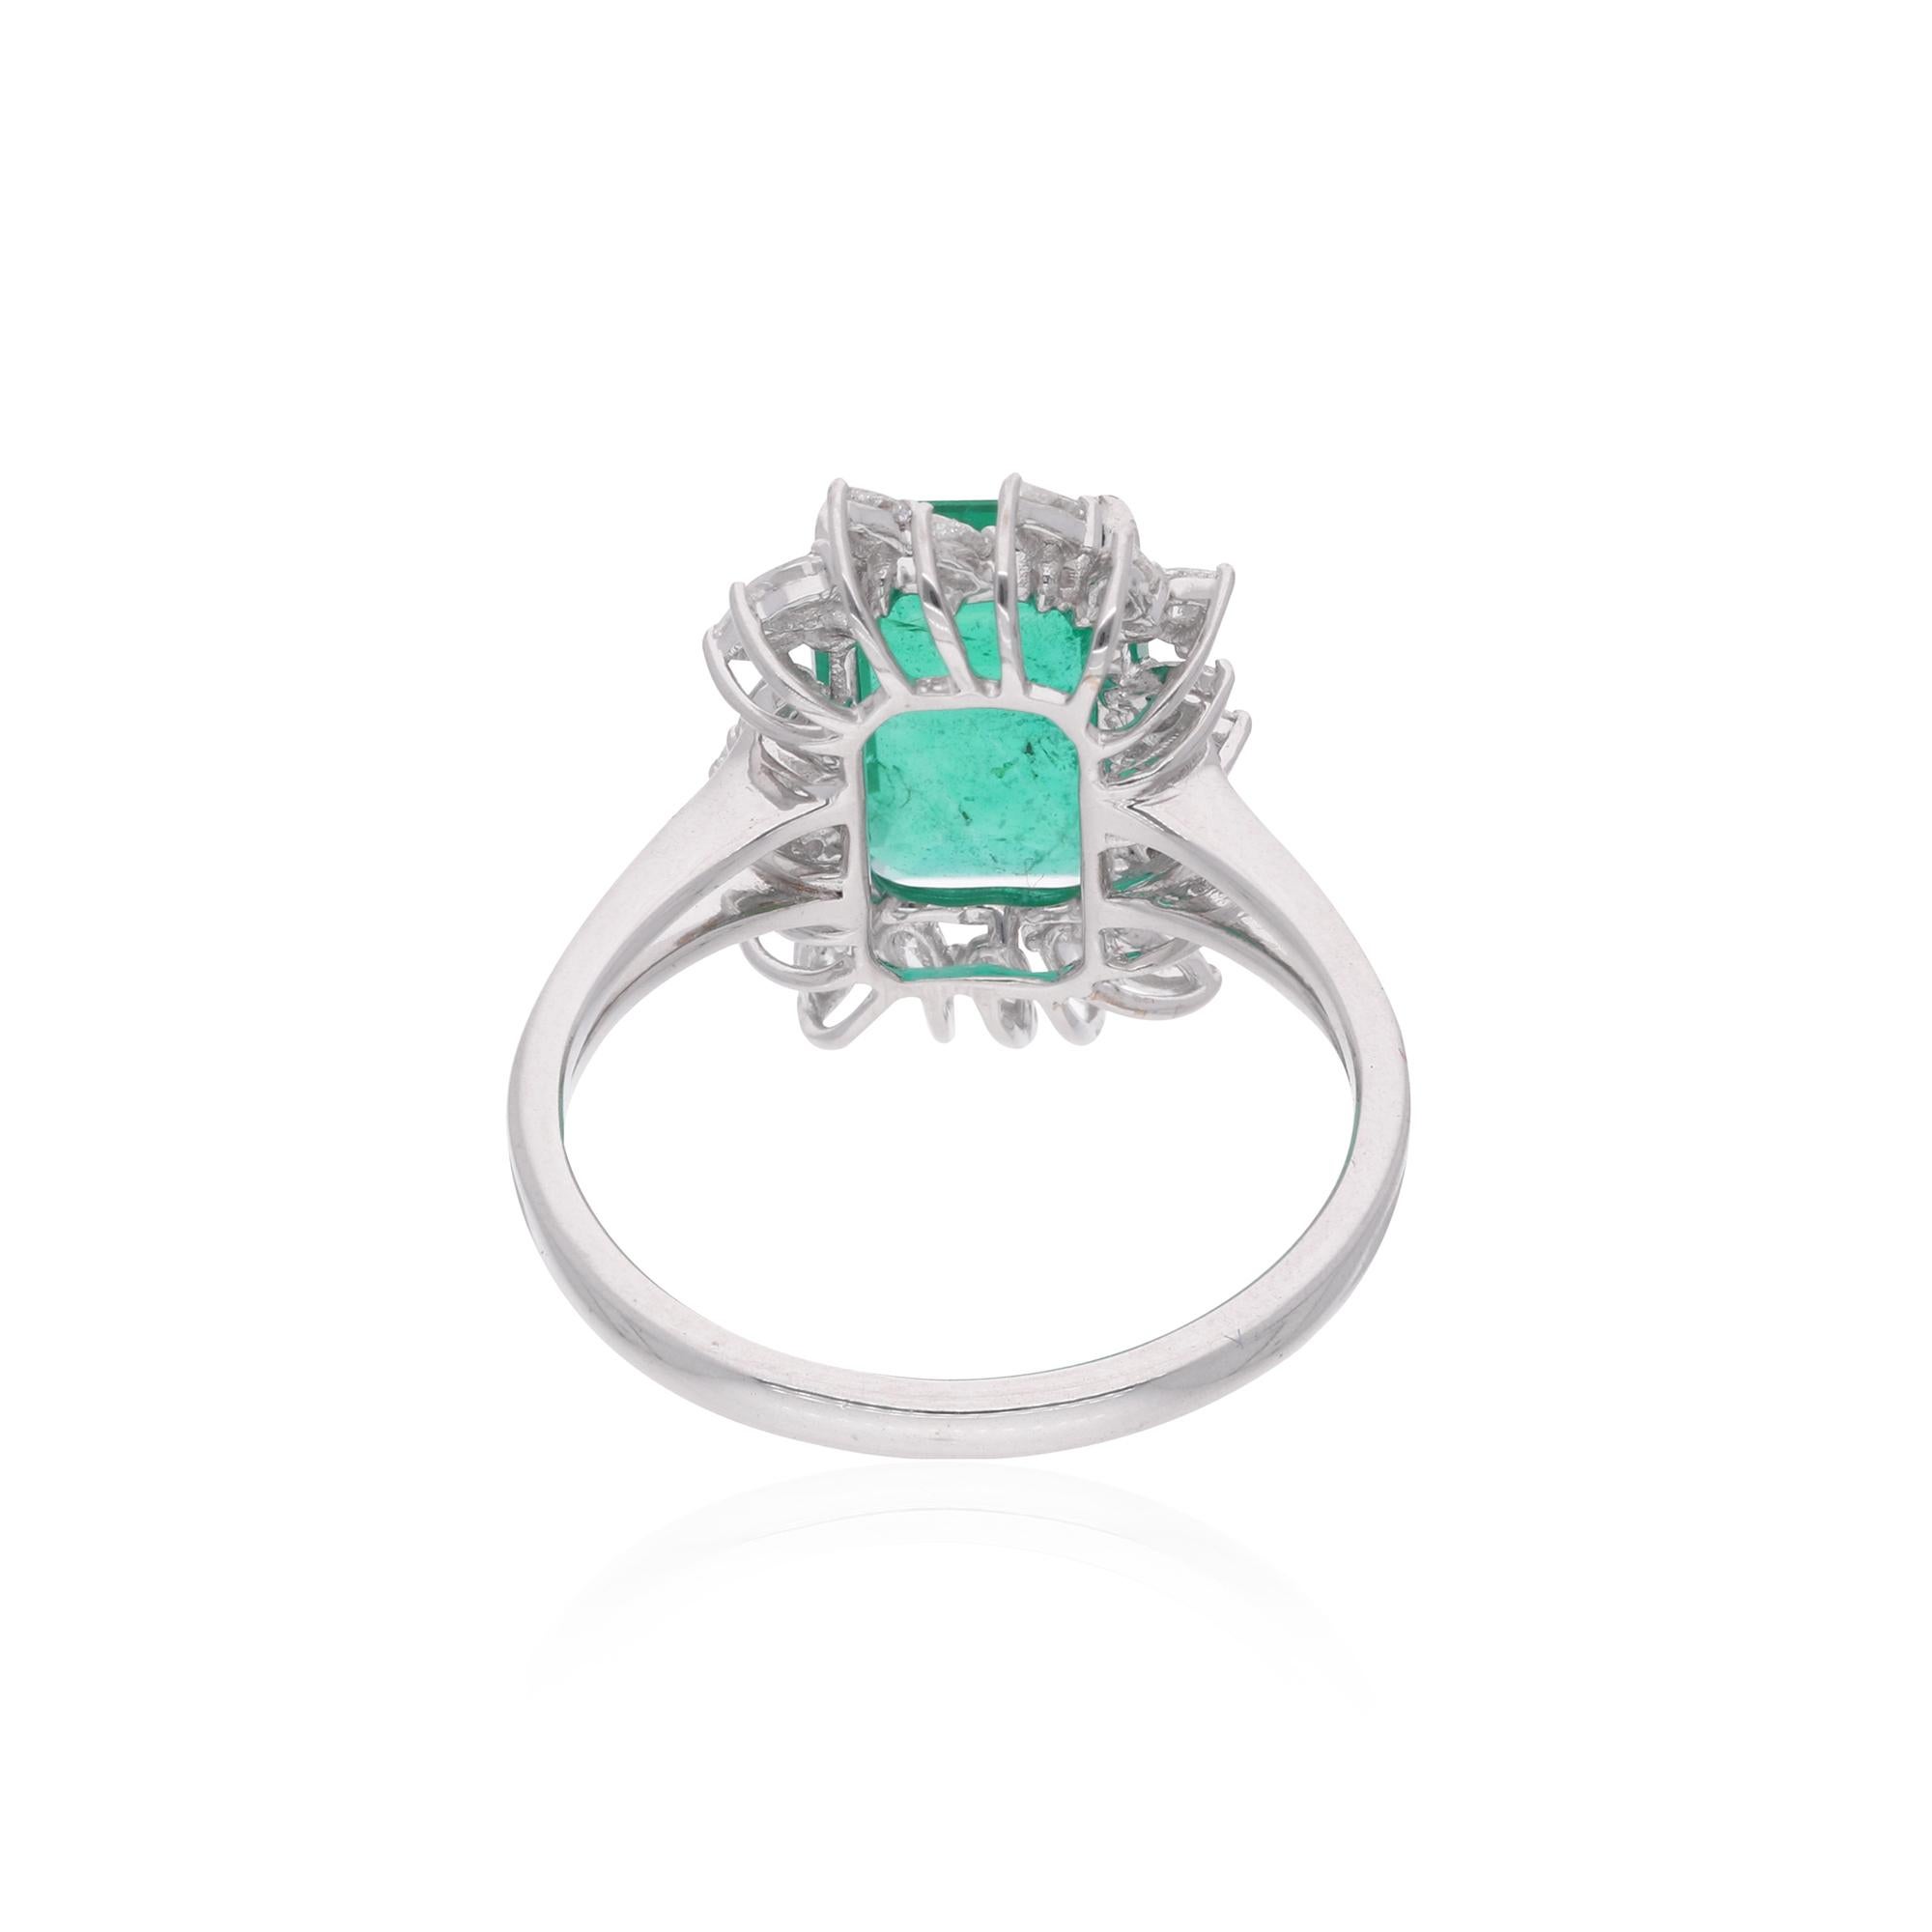 The Zambian emerald, renowned for its exceptional color and clarity, is securely nestled within a setting of lustrous 14 karat white gold, enhancing its natural beauty and brilliance. Surrounding the emerald are dazzling round-cut diamonds,